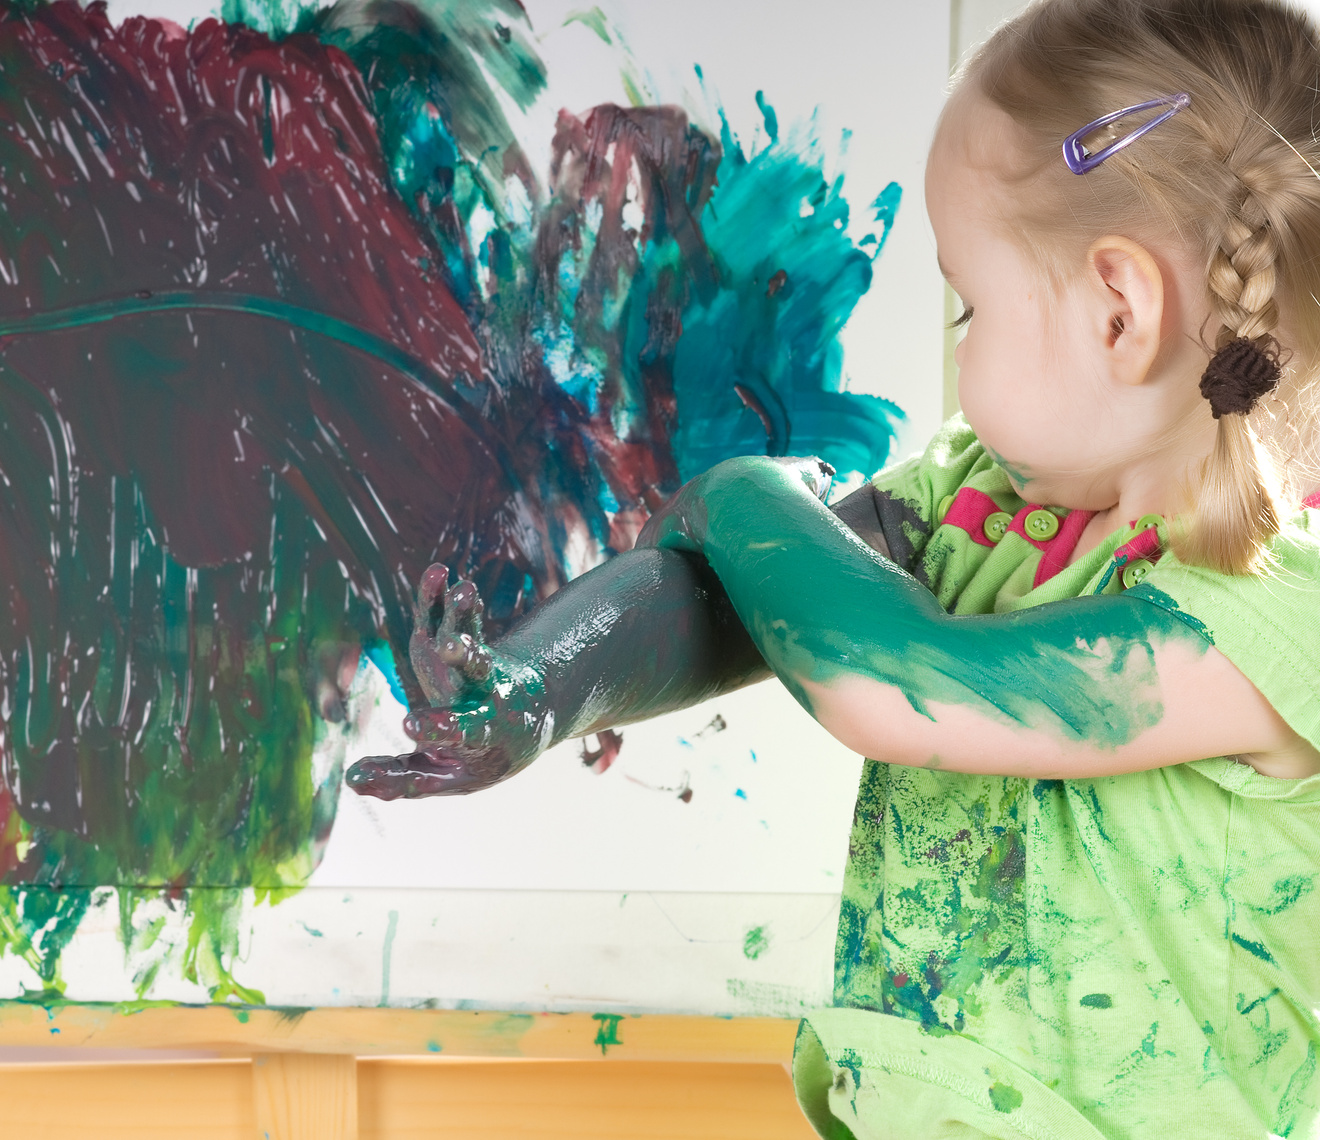 Child Painting on Canvas